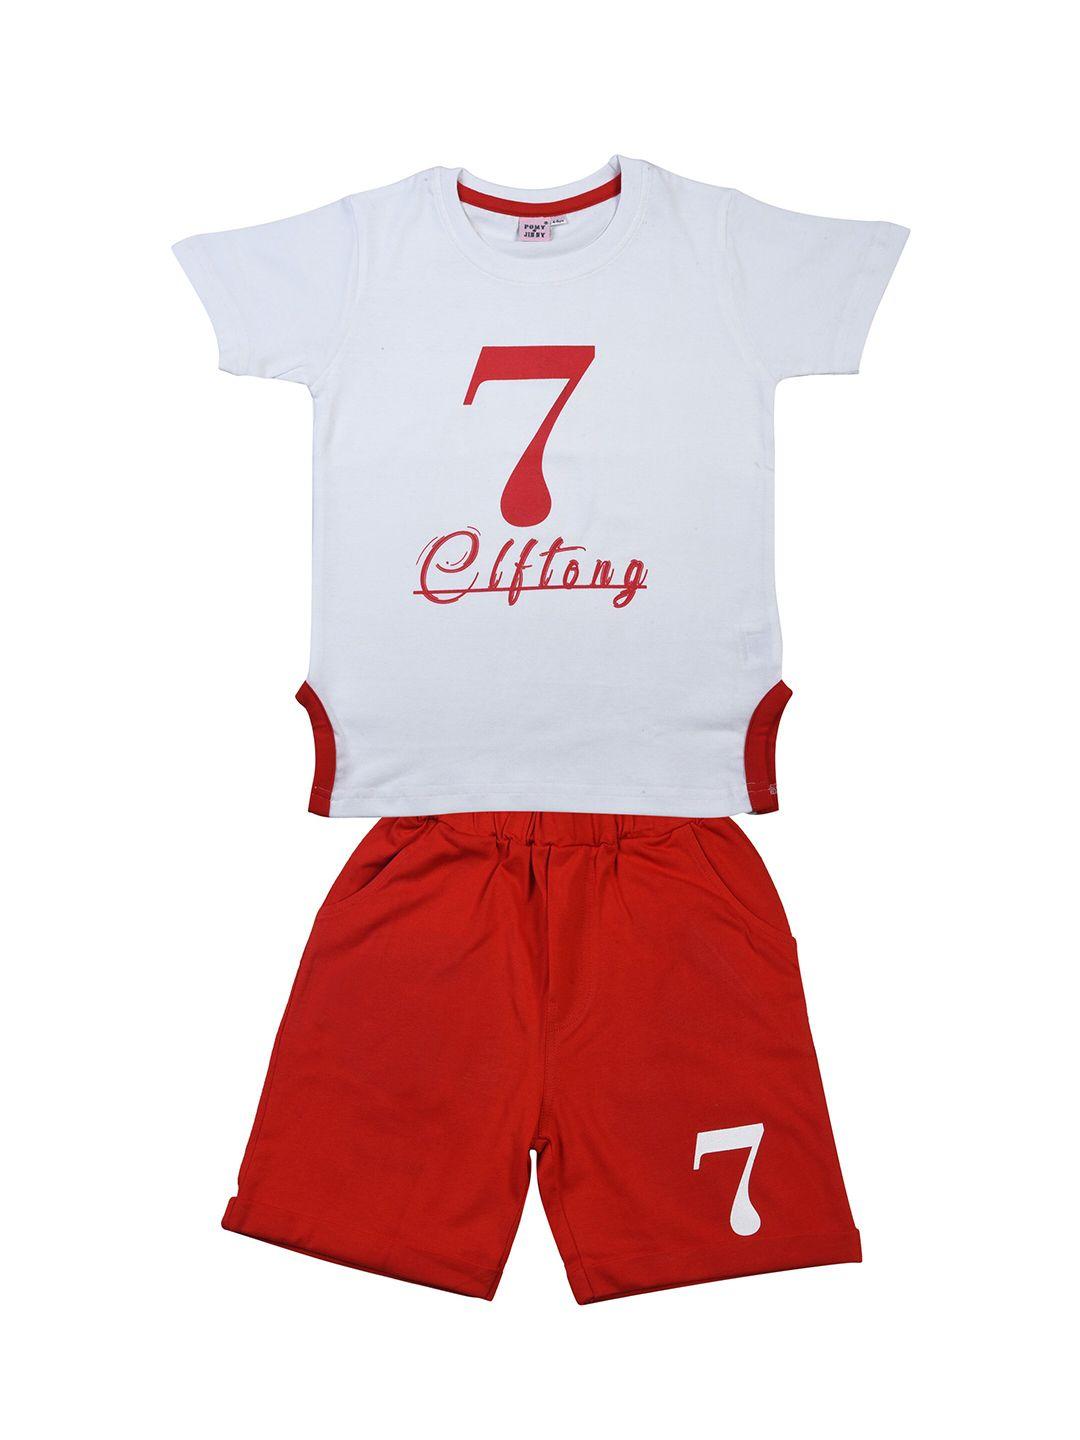 POMY & JINNY Boys White & Red Printed Pure Cotton Casual Clothing Set